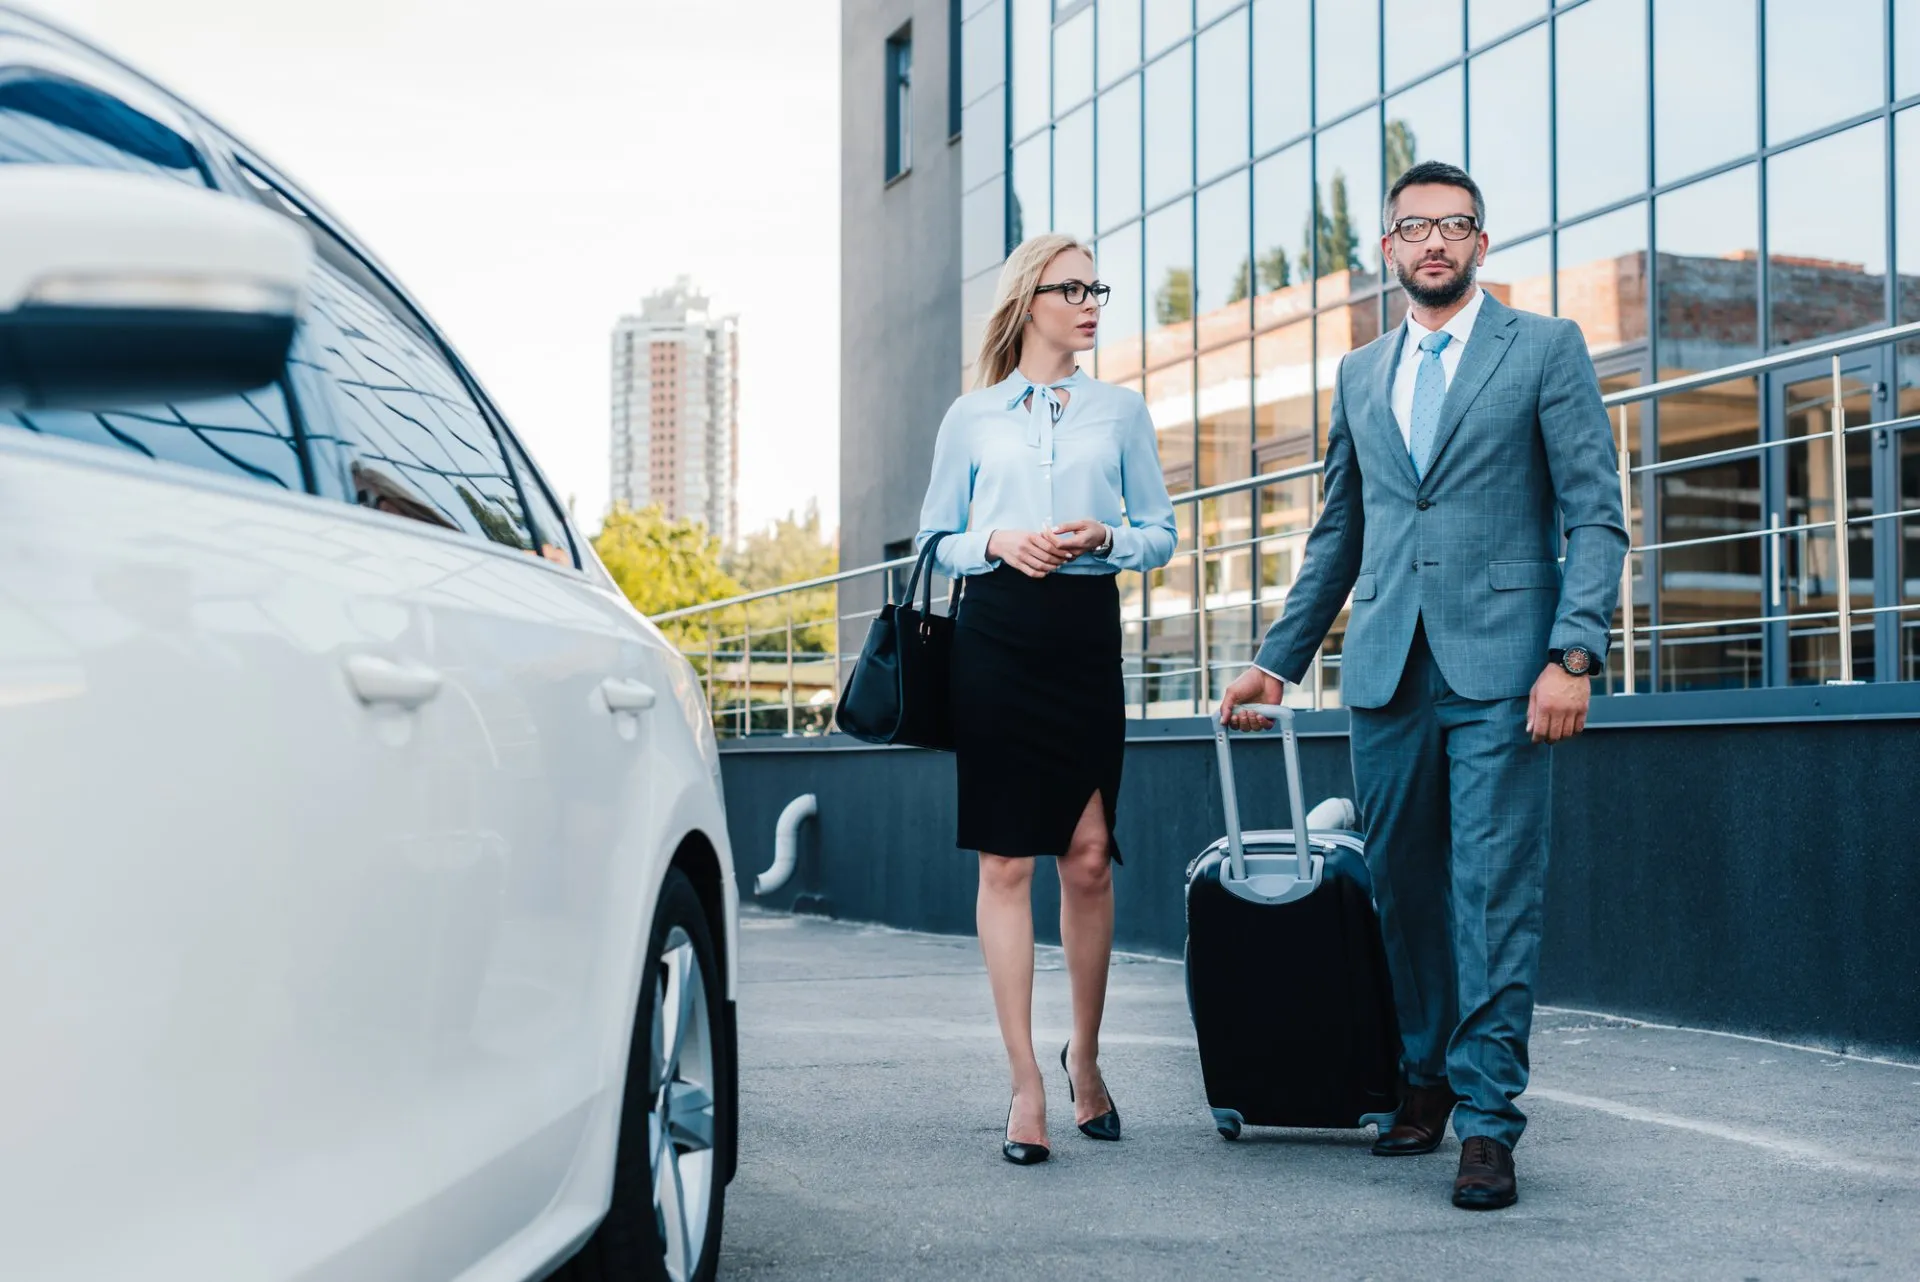 Your Ultimate Guide to Hassle-Free Airport Transfers